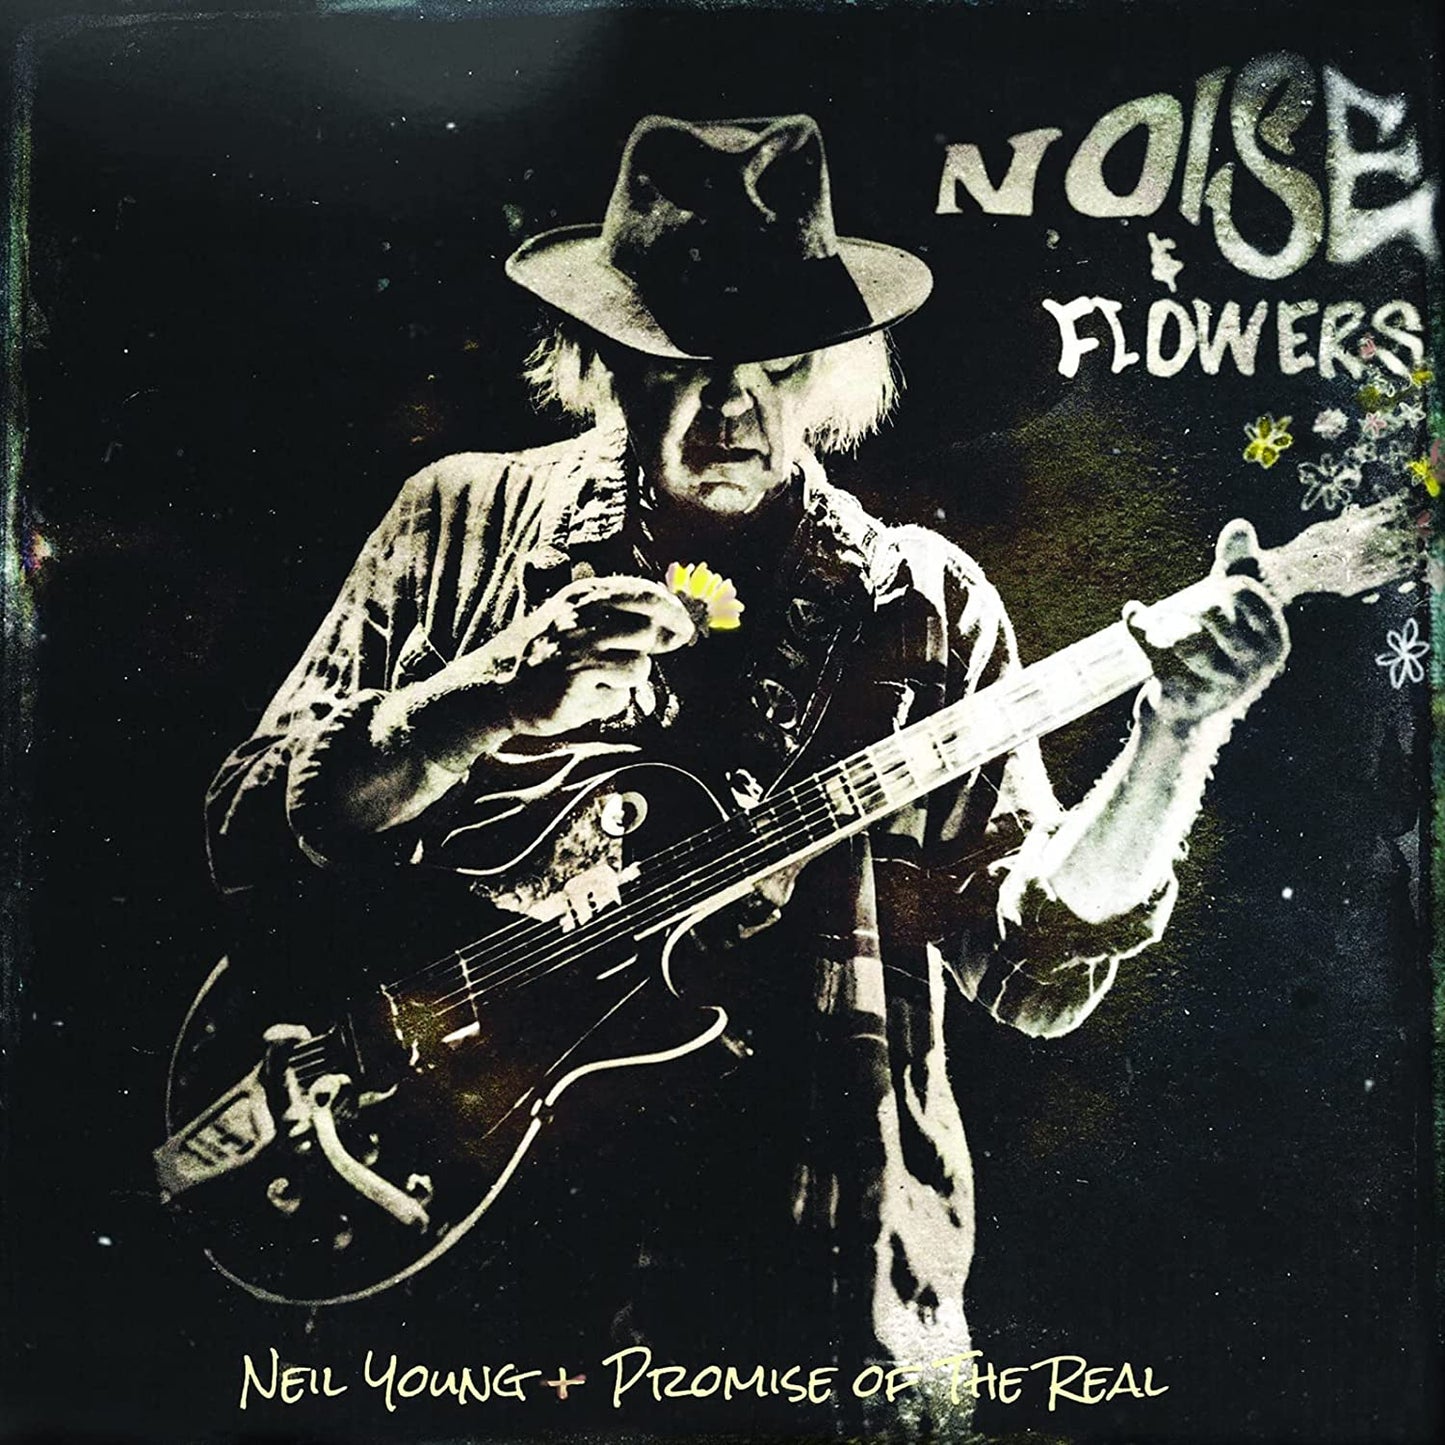 Neil Young + Promise Of The Real - Noise & Flowers - 2LP/CD/Blu